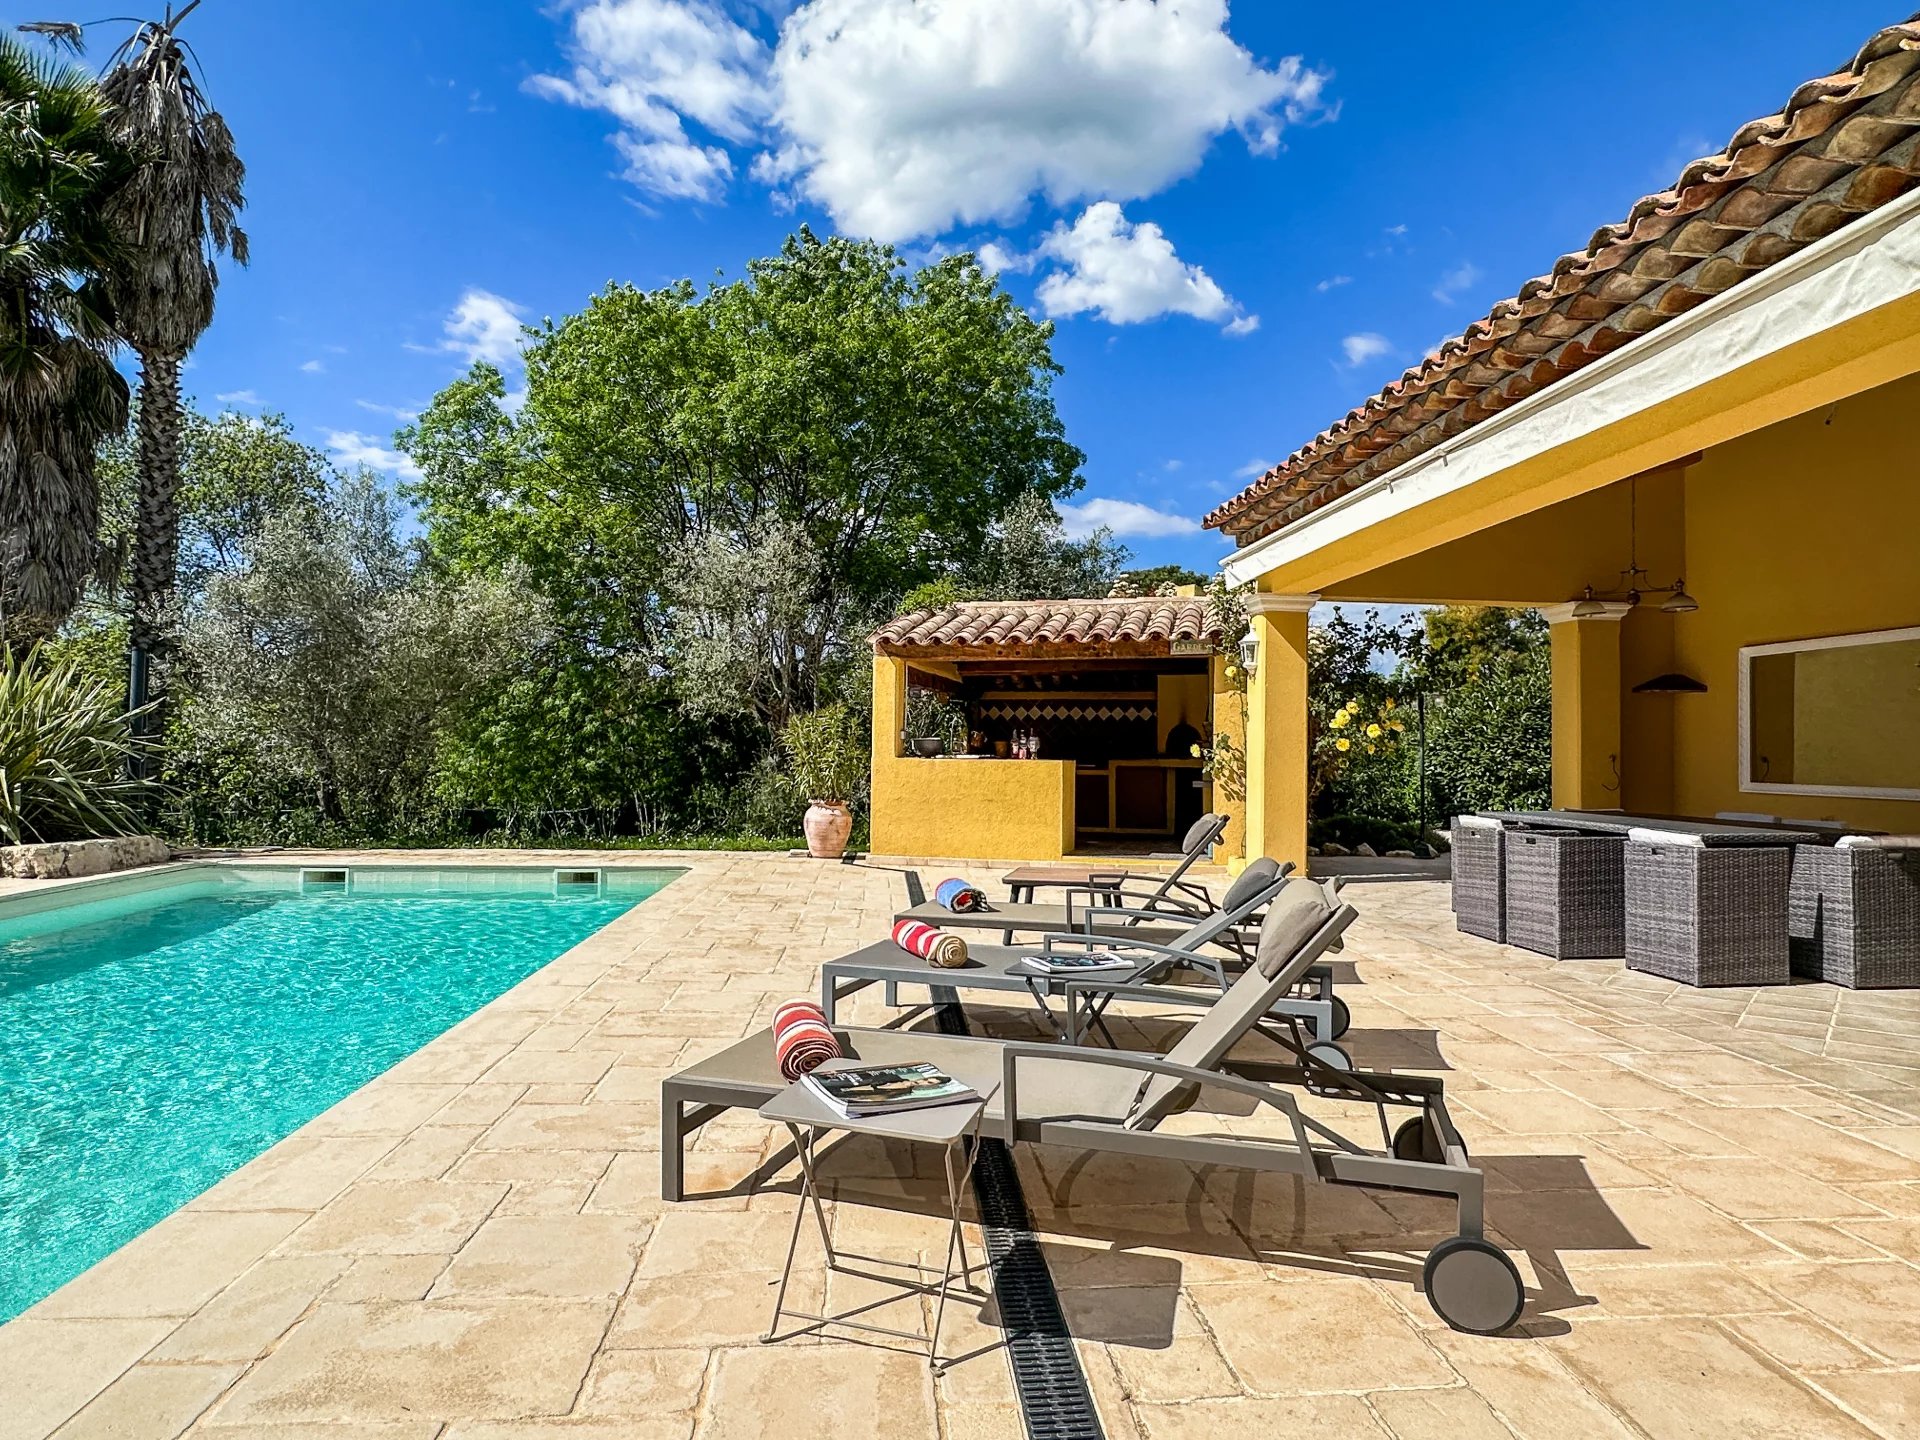 Villa with Pool for Sale in quiet residential area of Vence